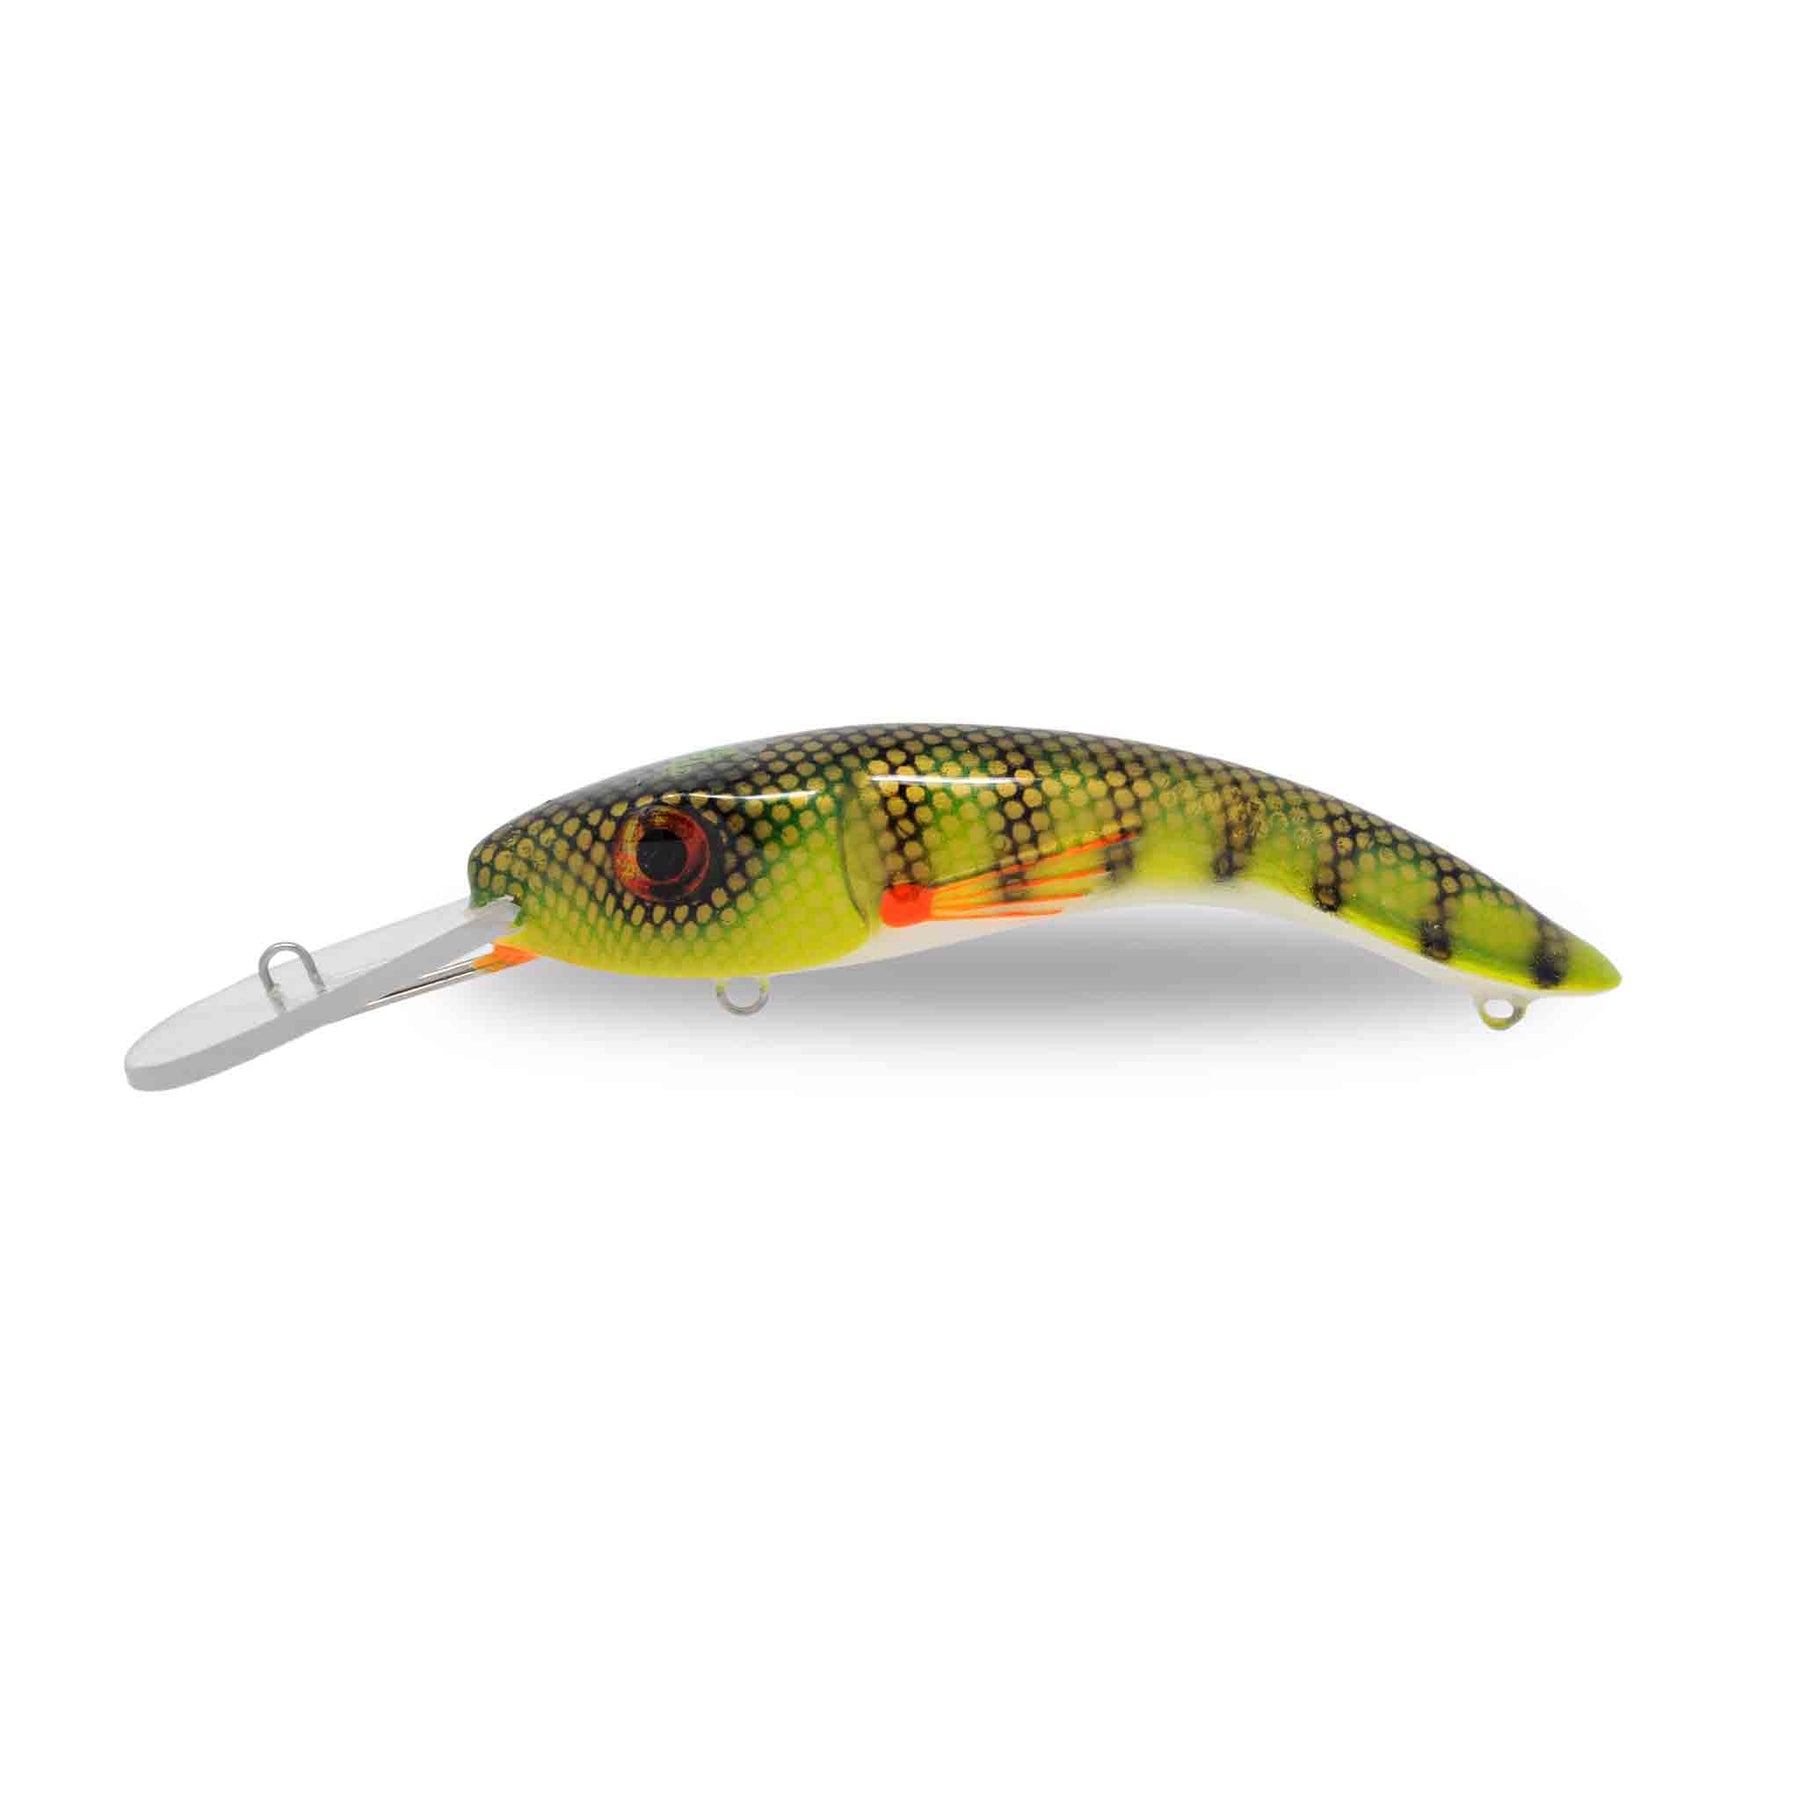 View of Crankbaits One Shot Tackle Perchosaurus 7" Crankbait Perch White Belly available at EZOKO Pike and Musky Shop